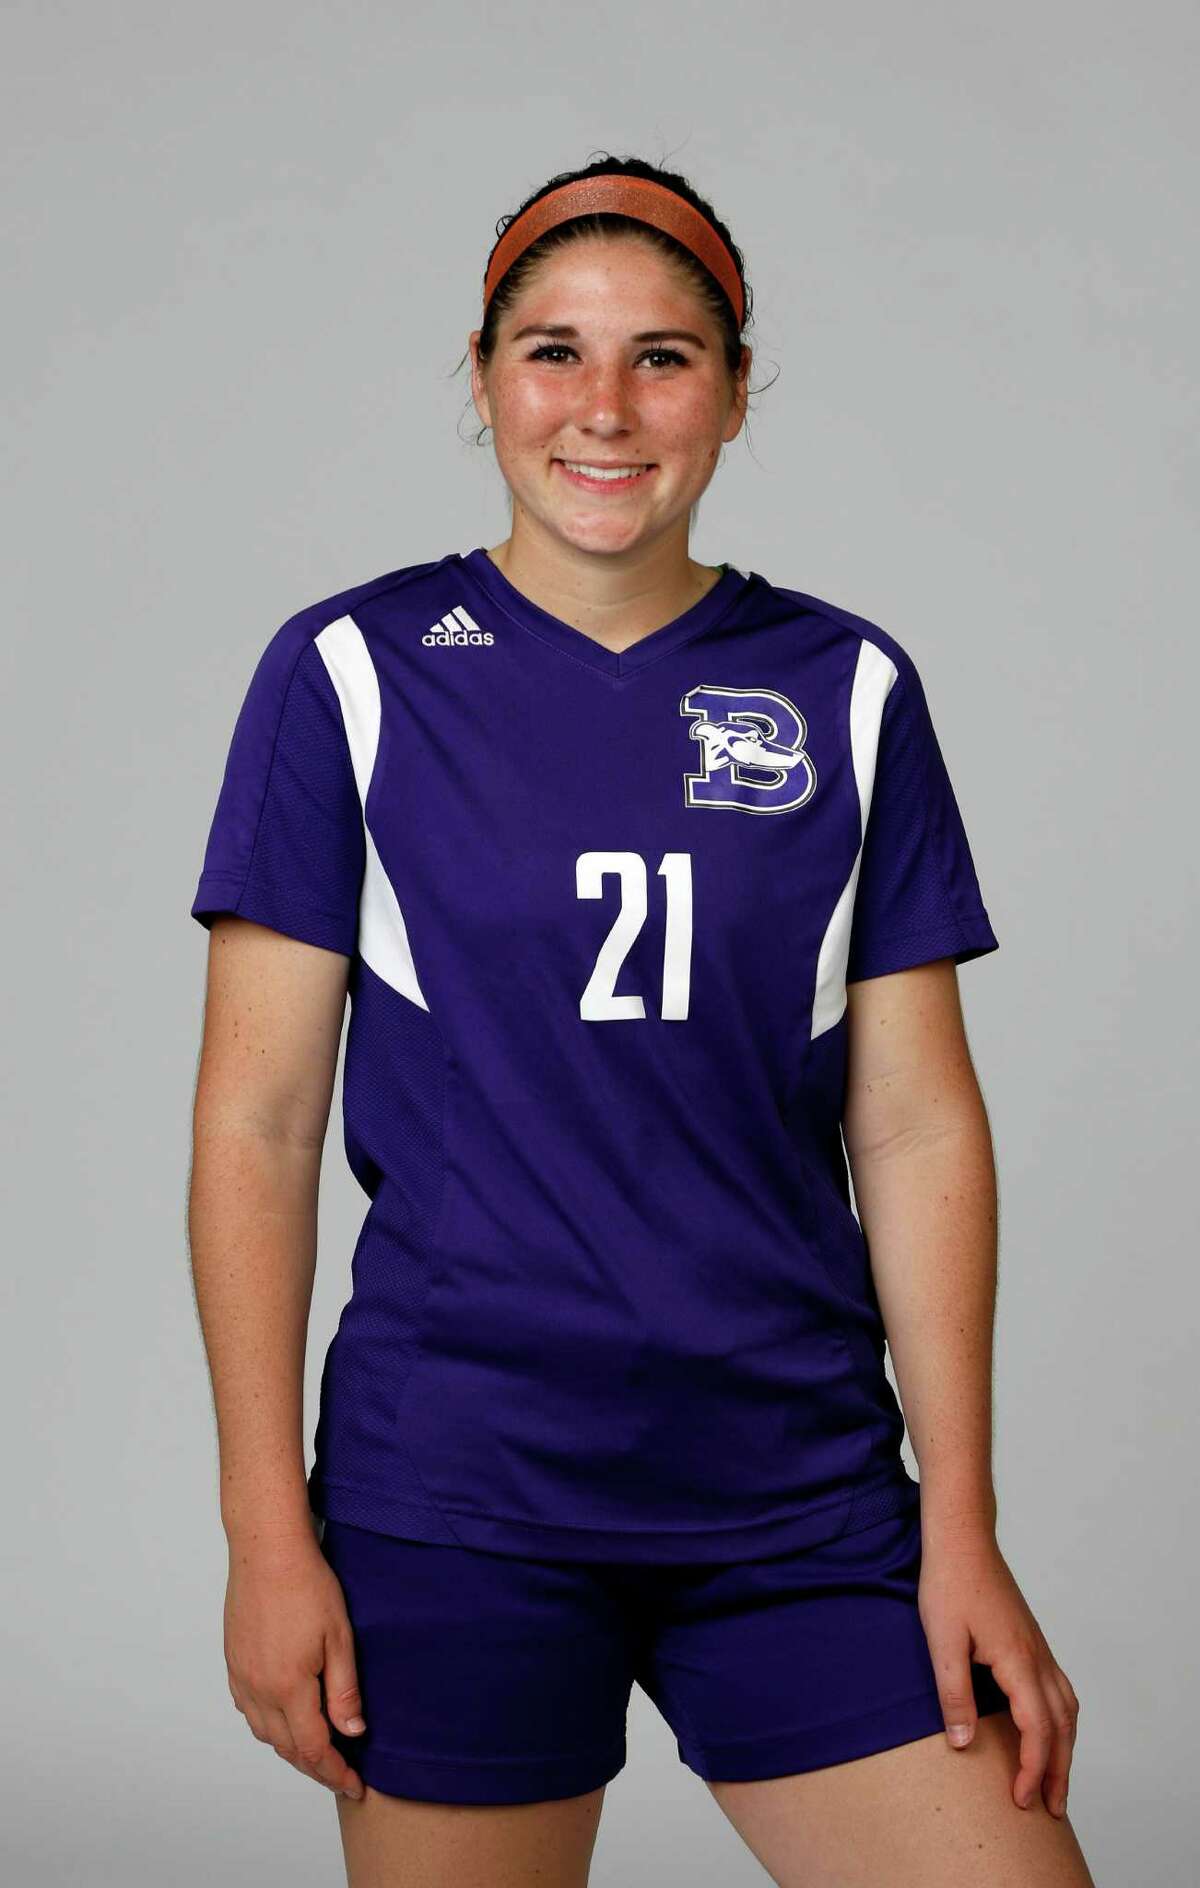 Emily Blaettner of Boerne is one of the Express-News All-Area Super Team soccer players on April 24, 2016.